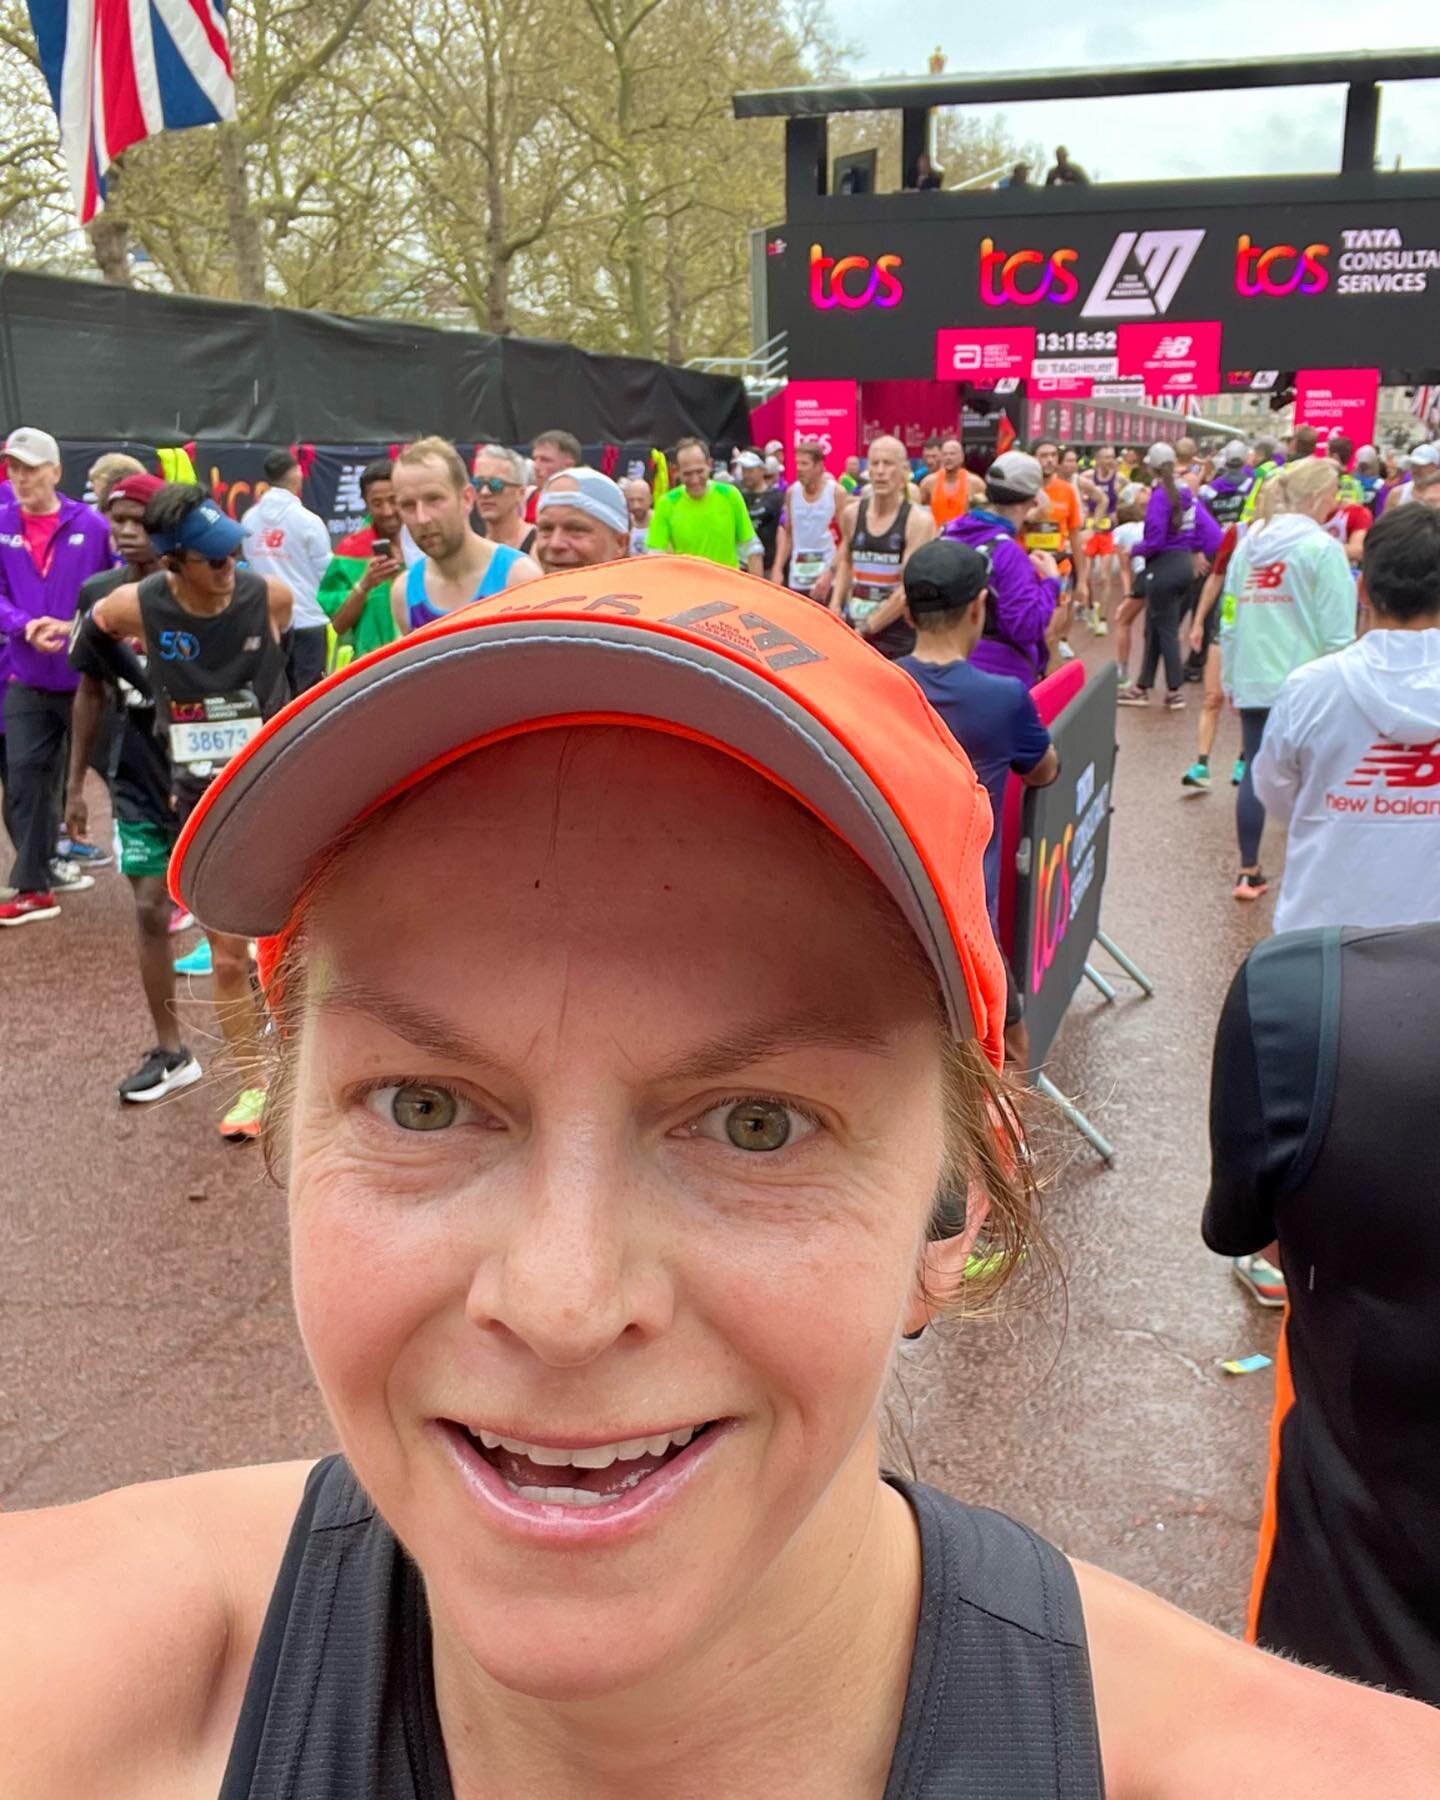 A 2023 @londonmarathon Experience shared by @tazmaniantaytay 🇬🇧

&ldquo;This was my 5th marathon. The course is really cool - you run over Tower Bridge, past a random castle/manor, around an old ship, past Big Ben and finish at Buckingham Palace. T